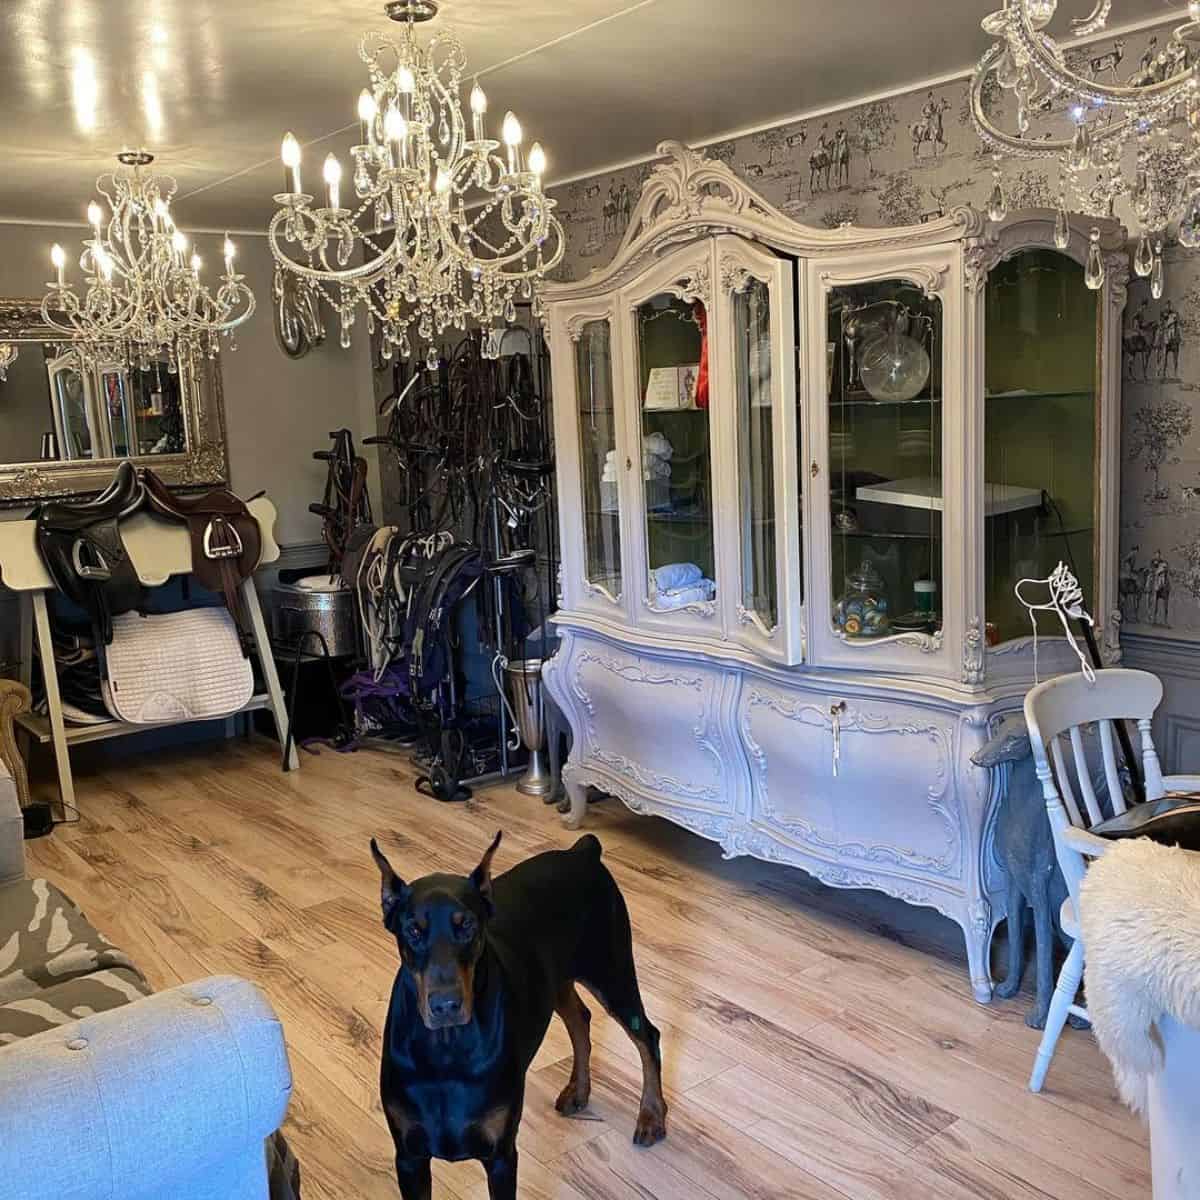 A tack room with fancy furniture filled with horse accessories and a brown dog.